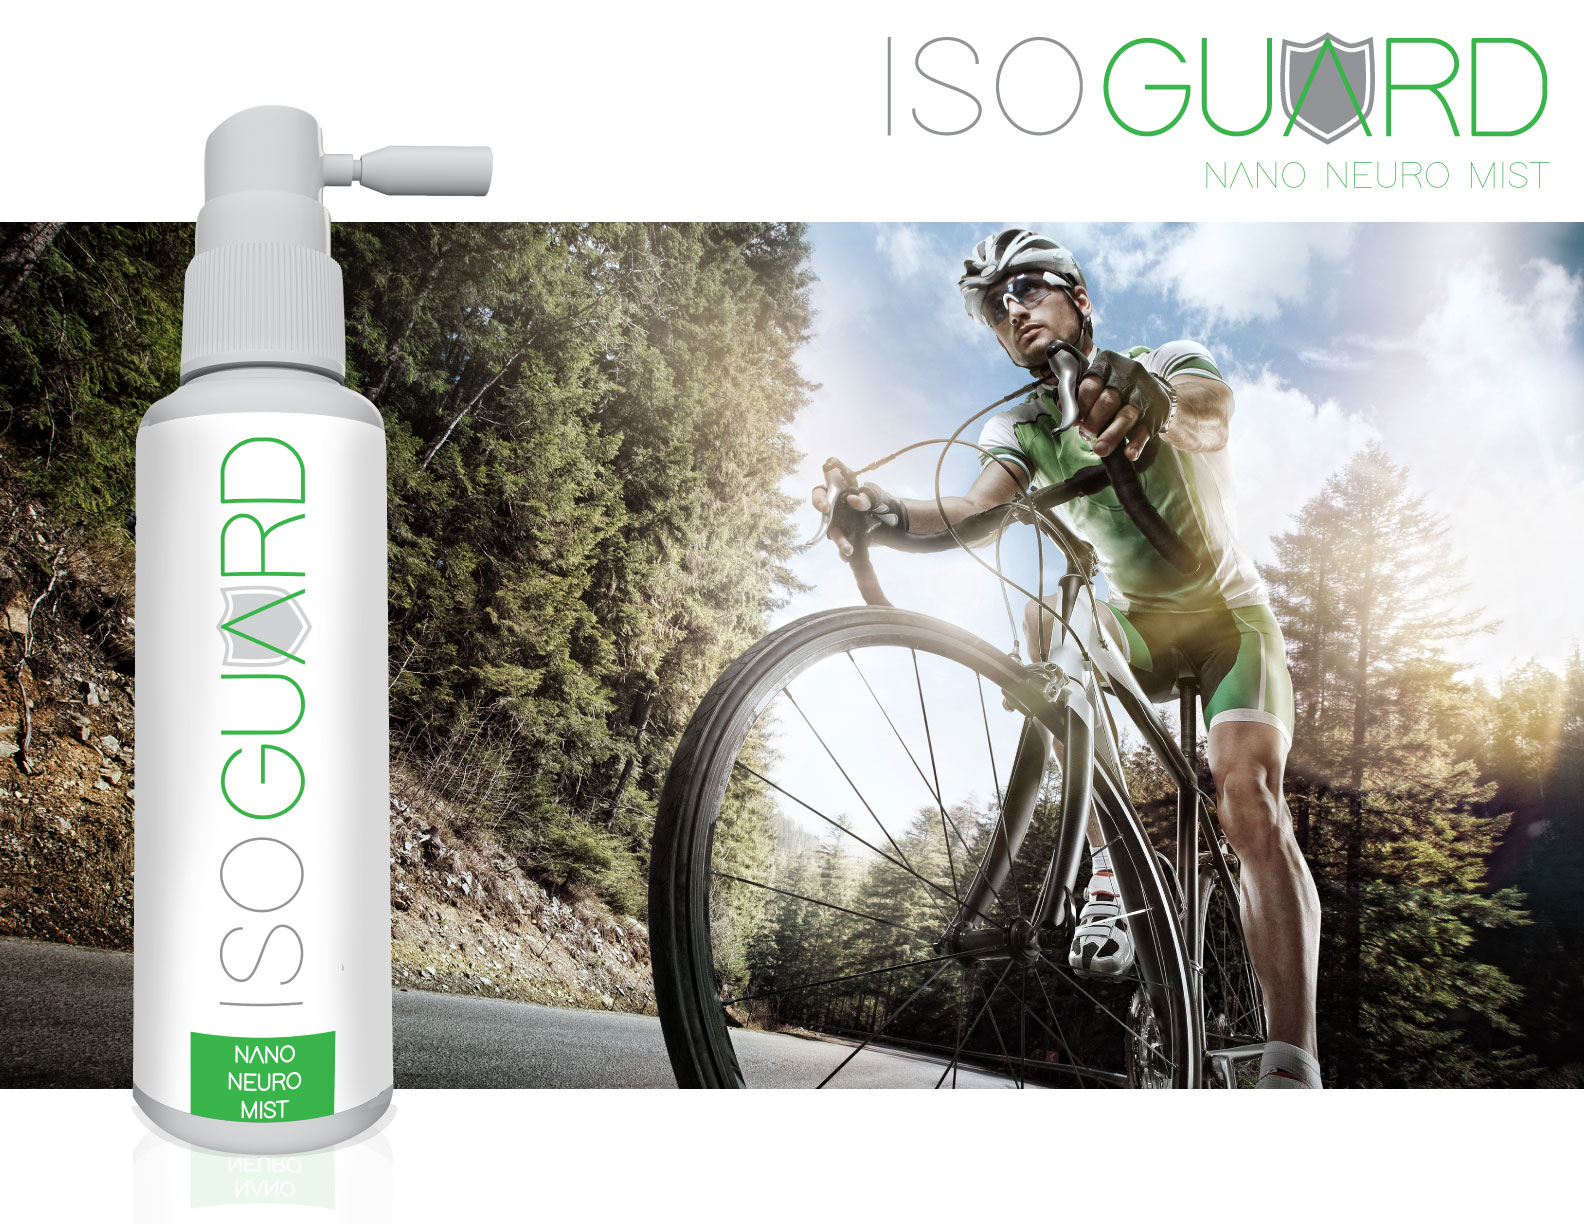 ISOGuard - oral mist alleviates discomfort and tension naturally